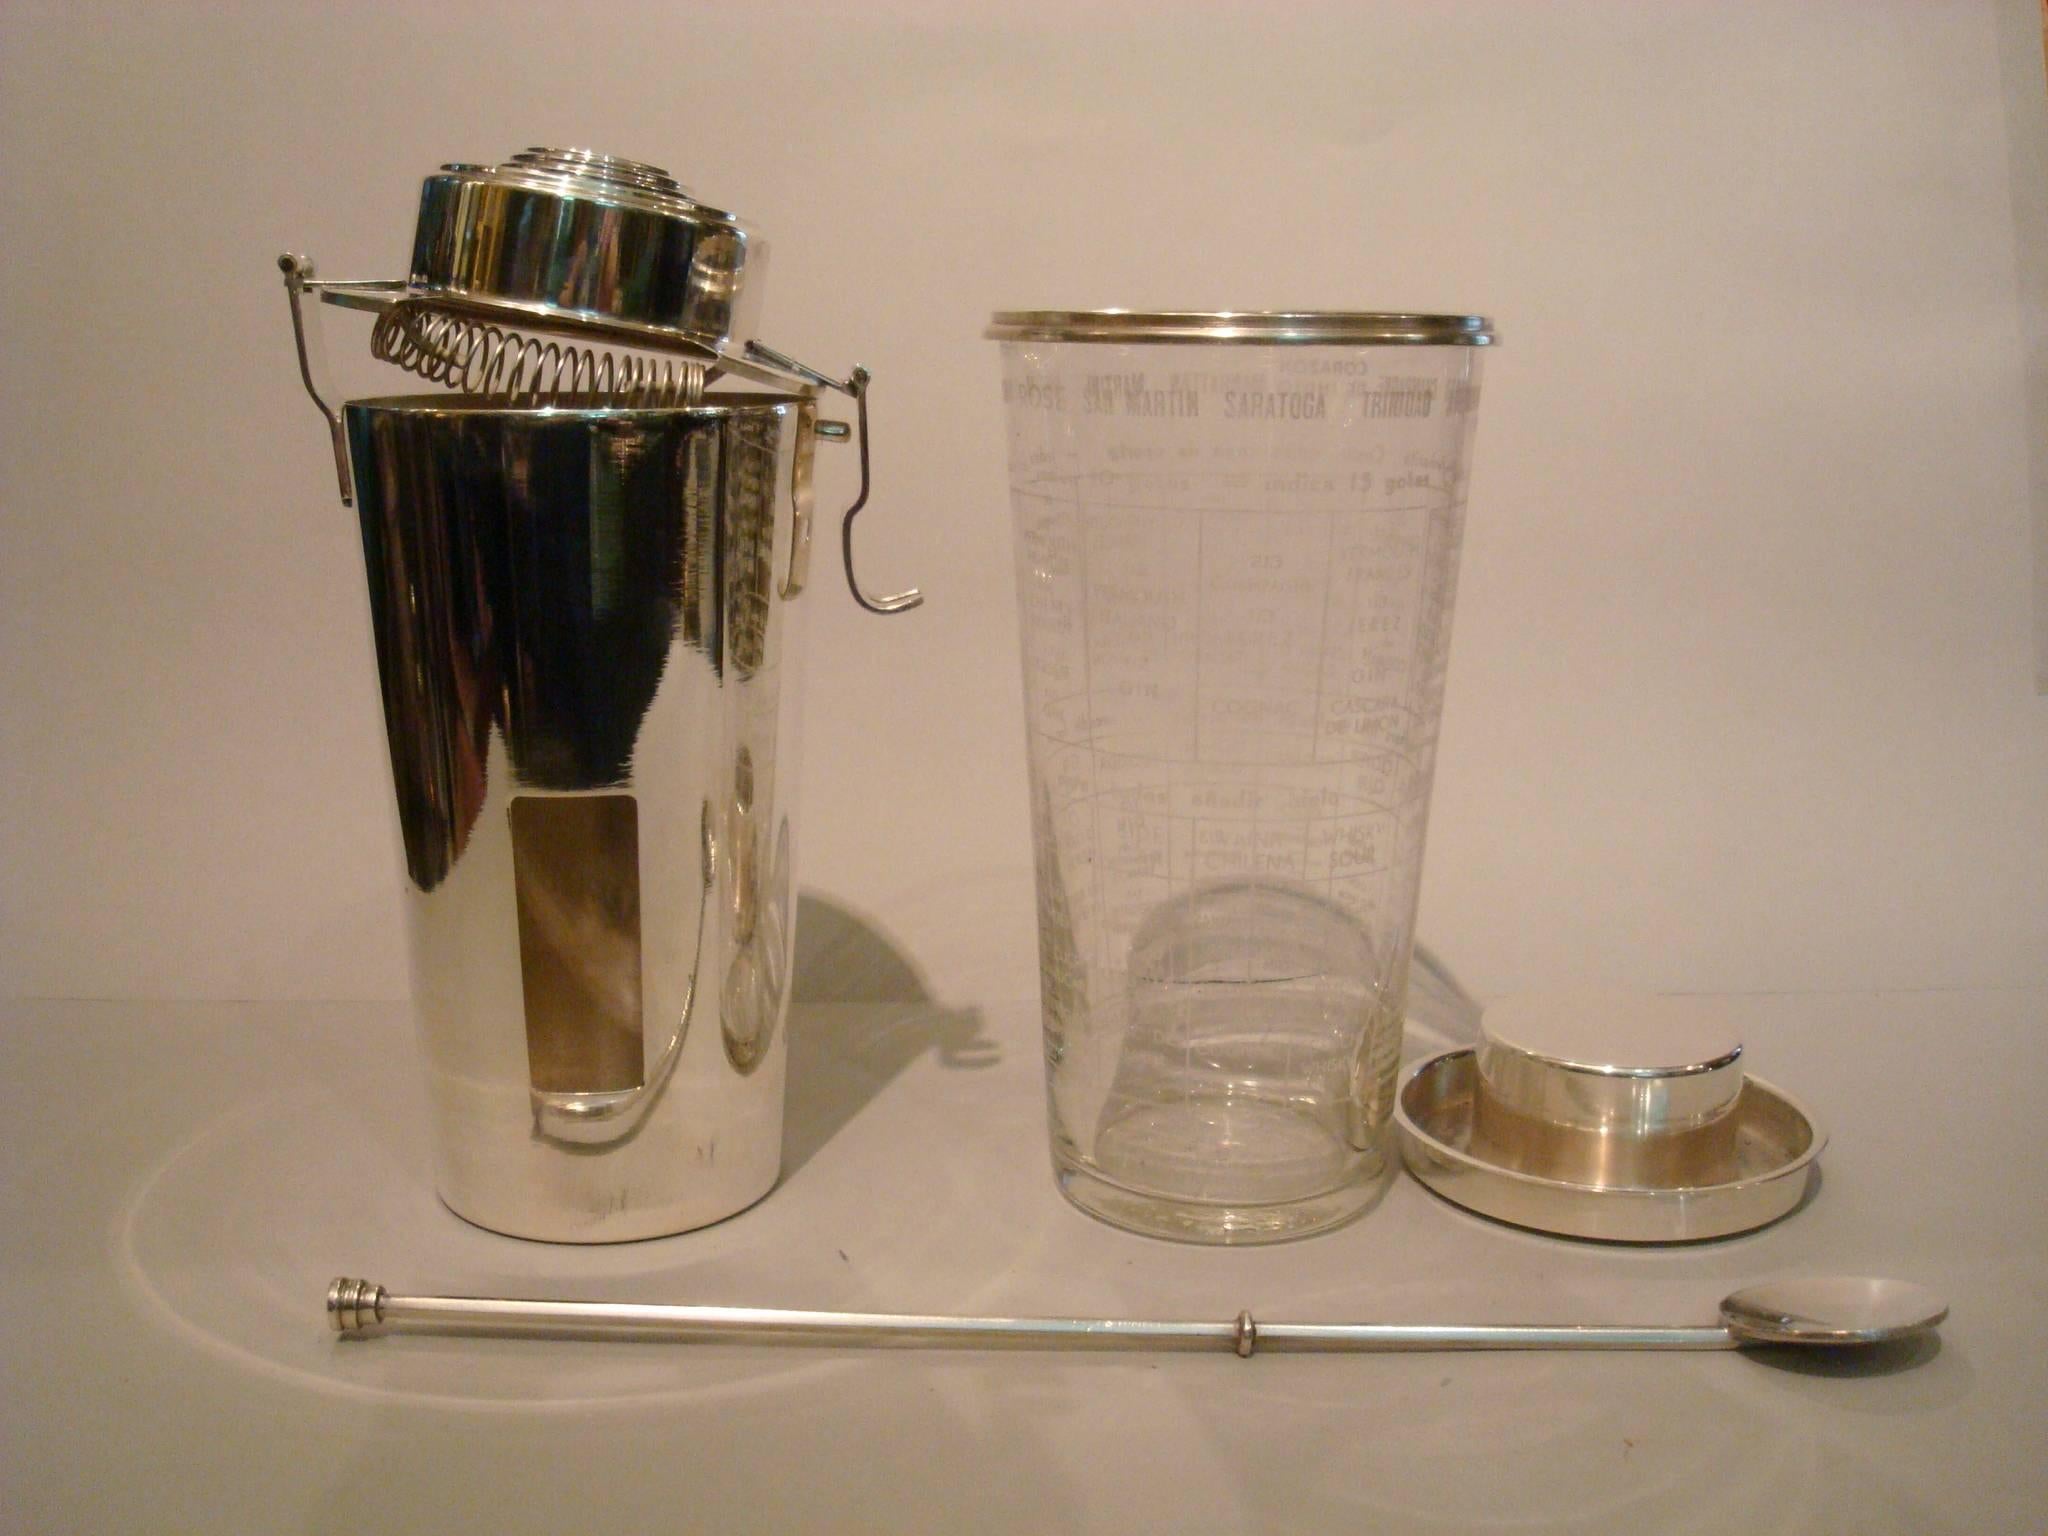 Brass Art Deco Recipes Cocktail Shaker “the Barman“ by Ghiso, France 1930’s